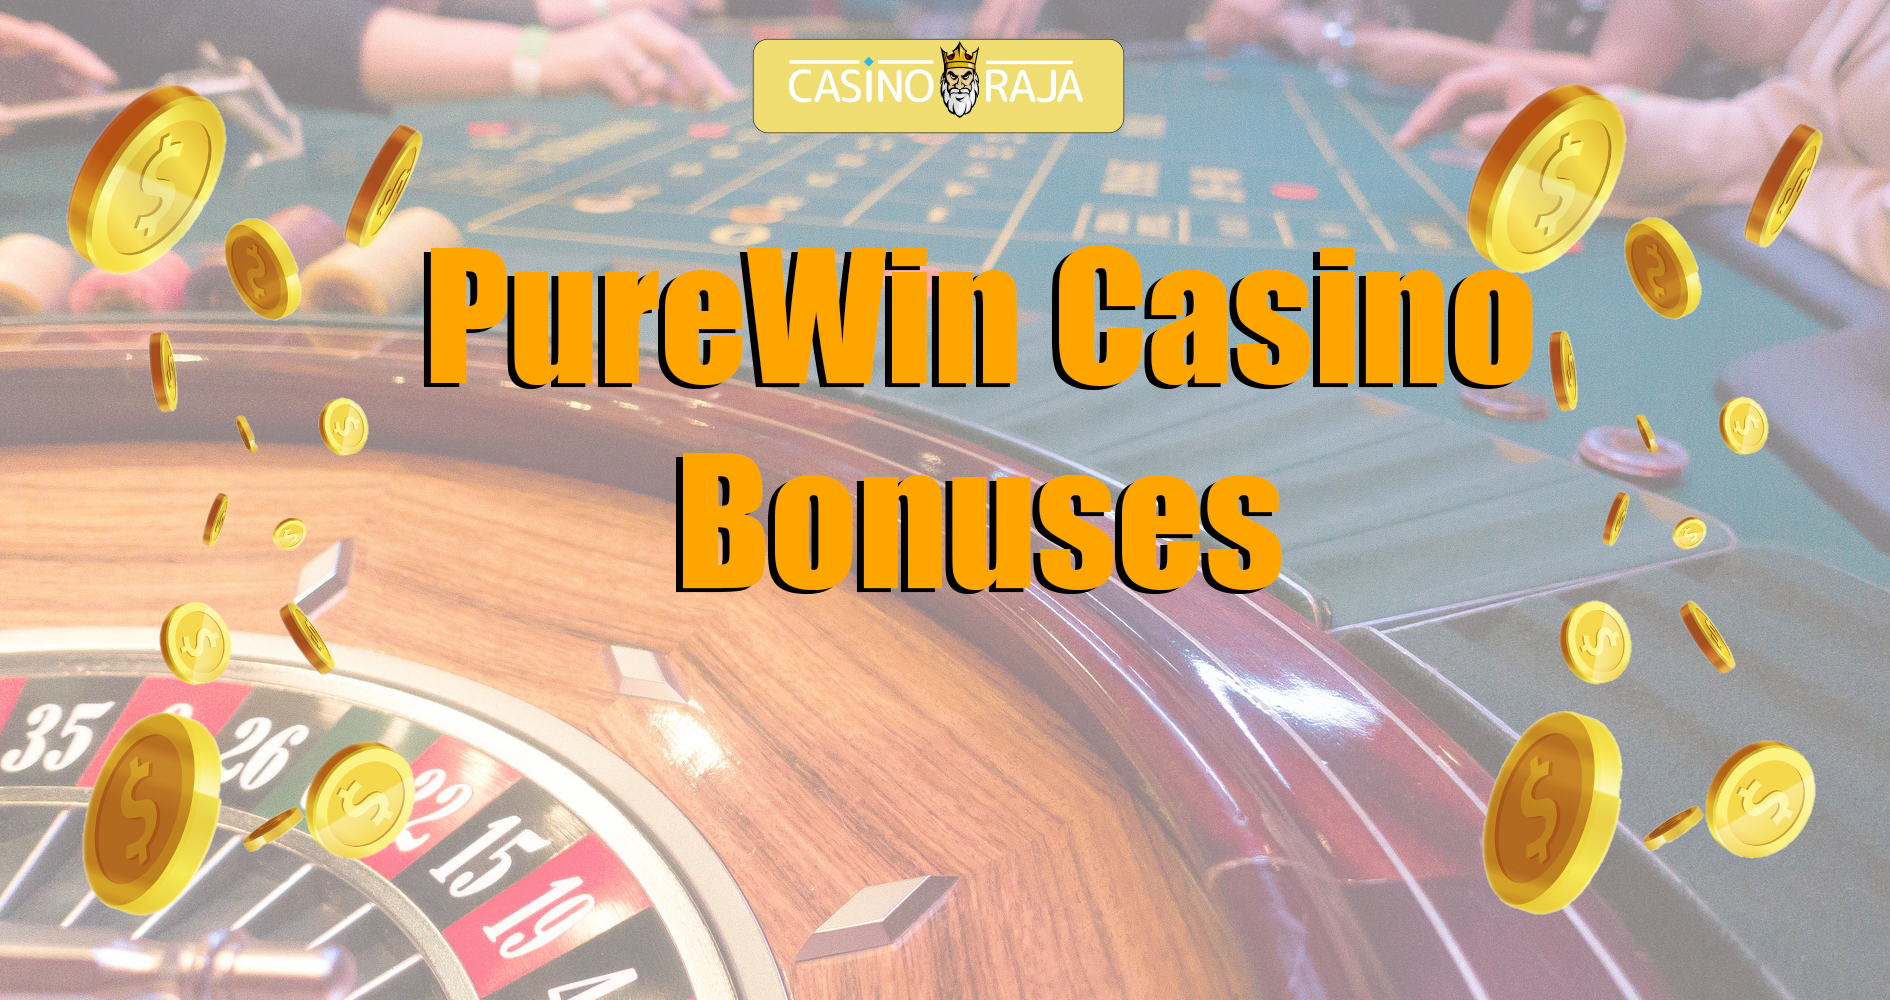 All available bonuses on the Purewin.